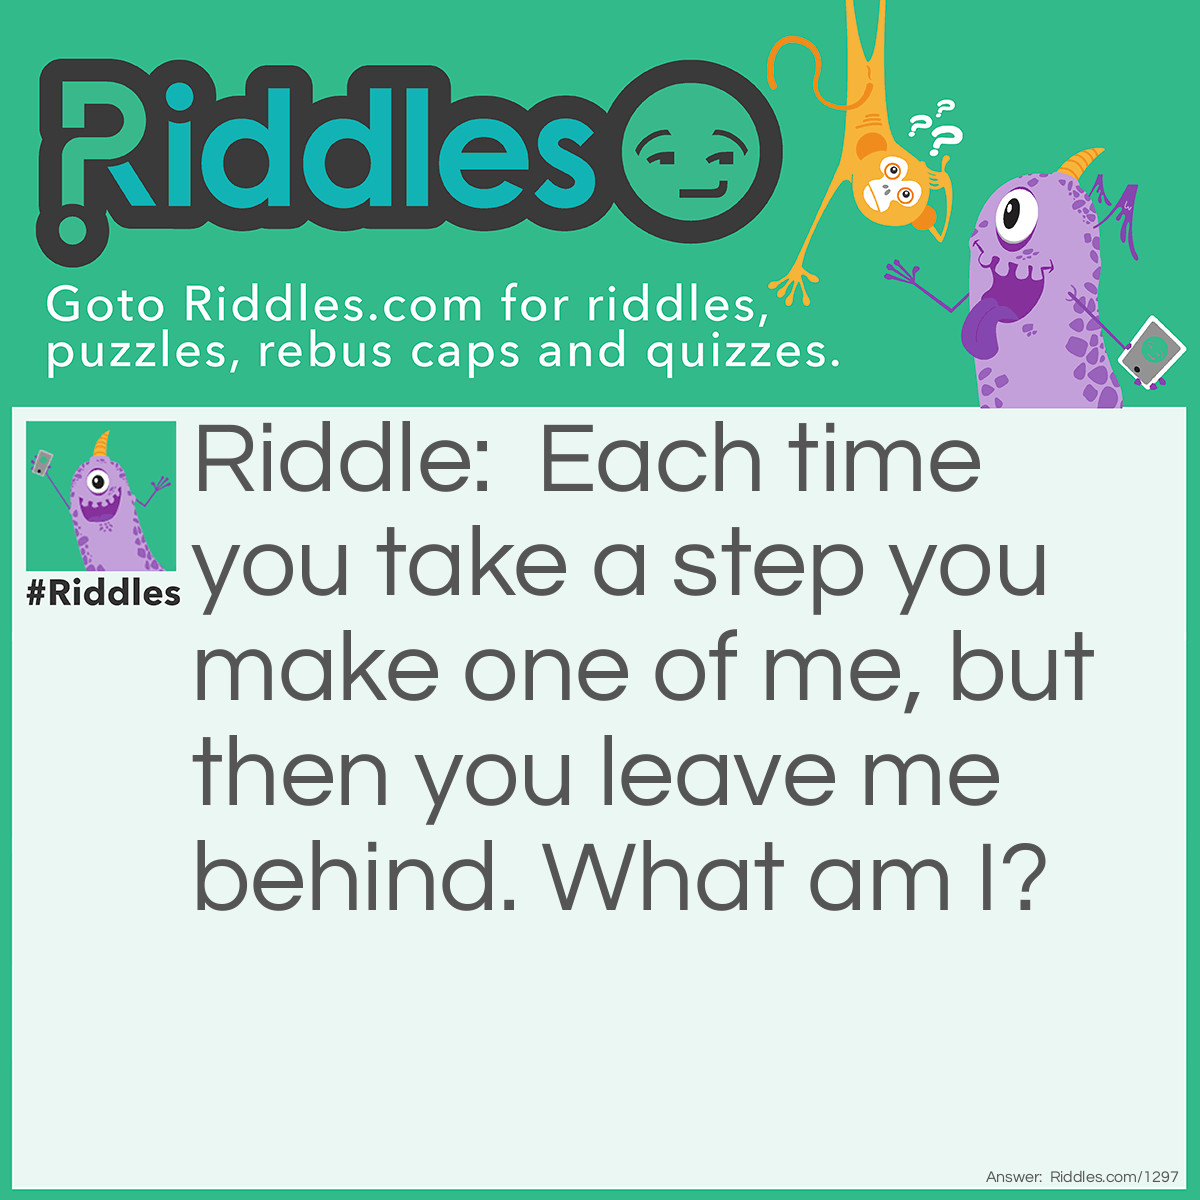 Riddle: Each time you take a step you make one of me, but then you leave me behind. What am I? Answer: A footprint.